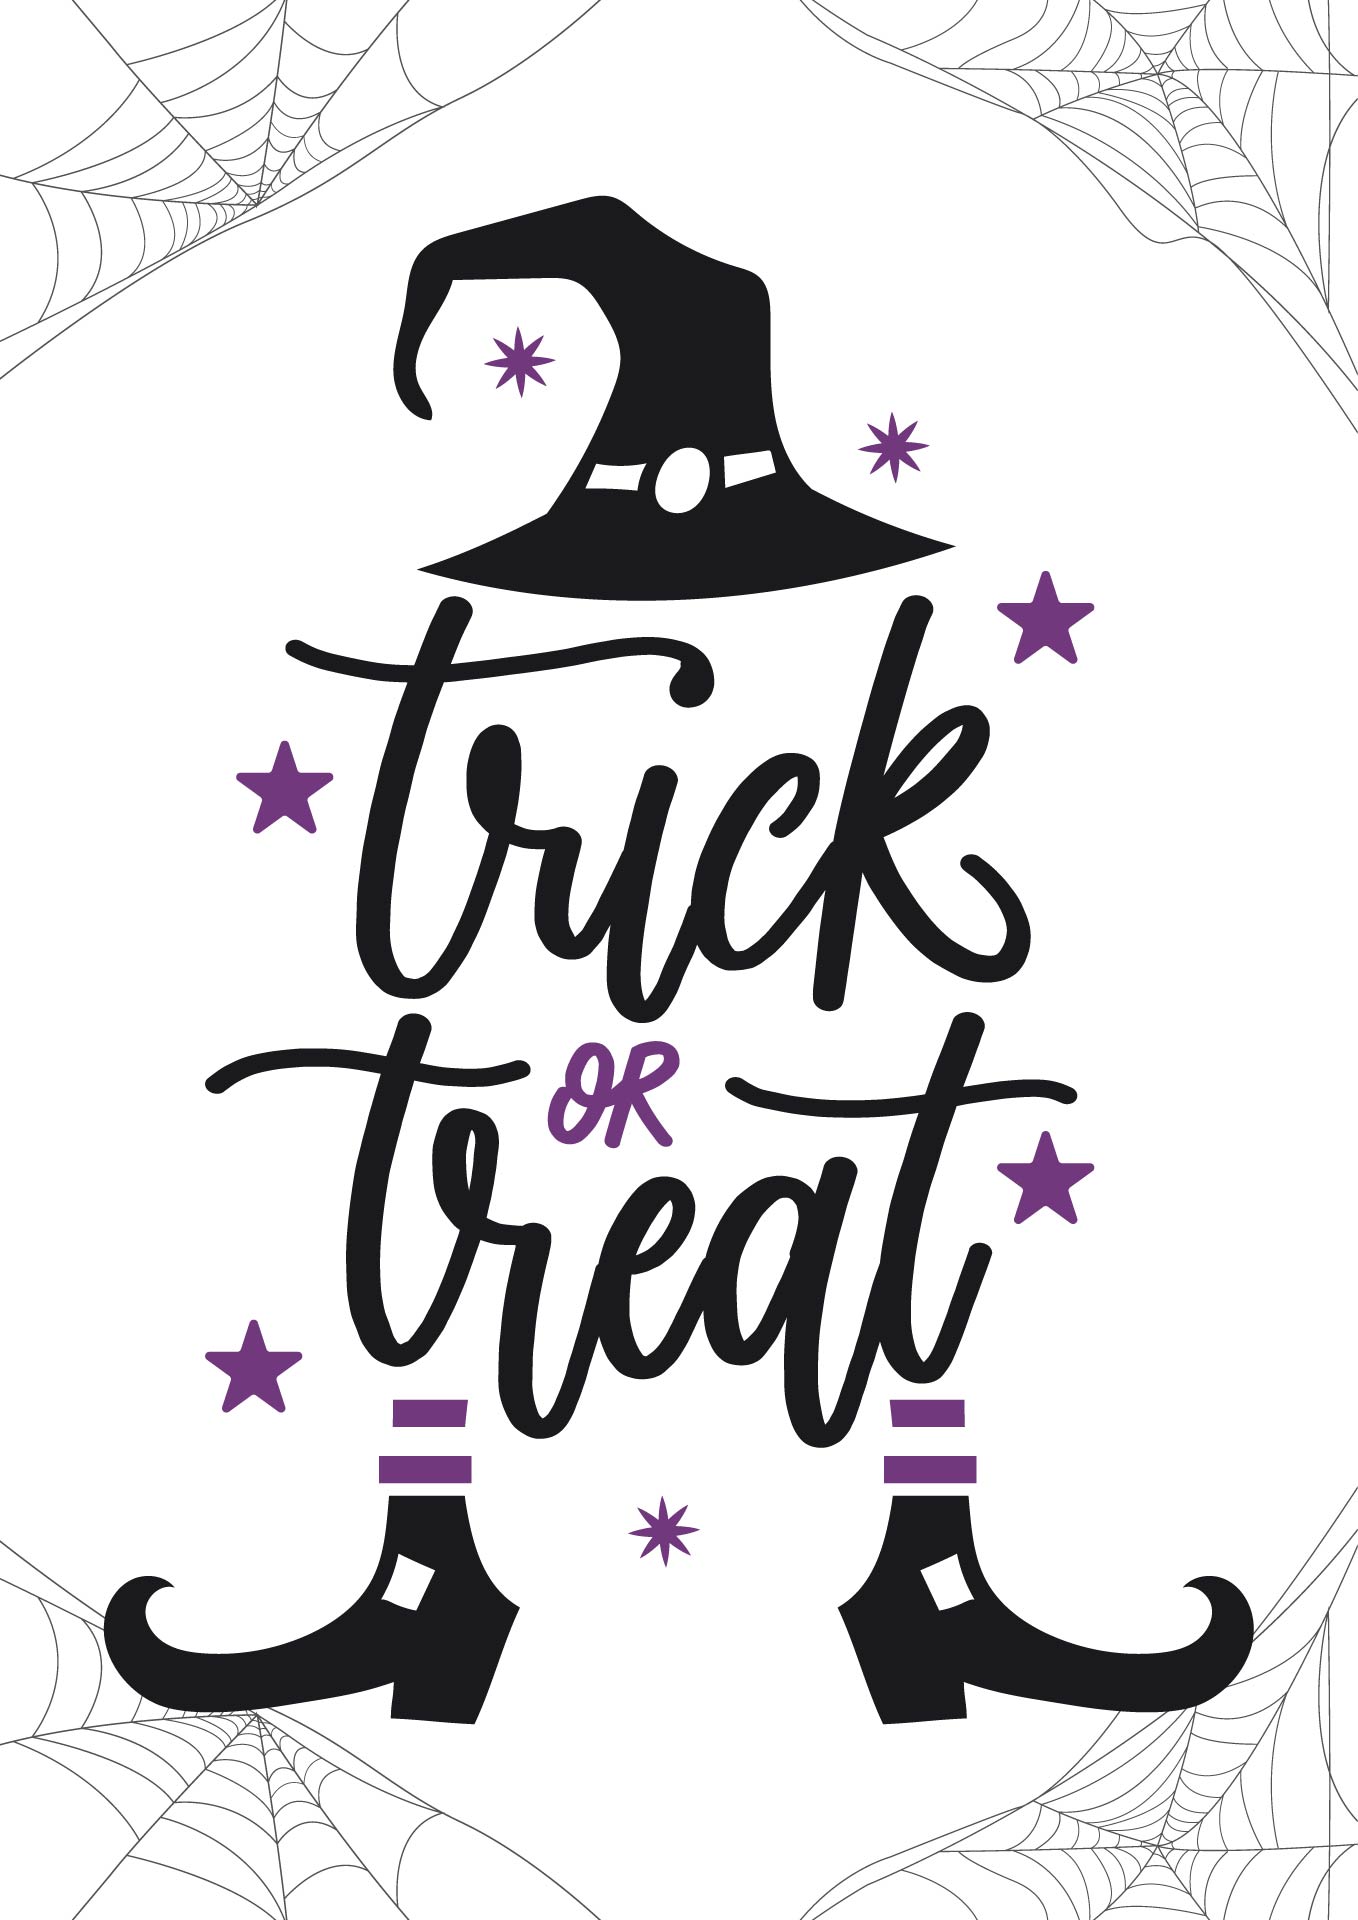 Cute And Punny Printable Halloween Greeting Cards